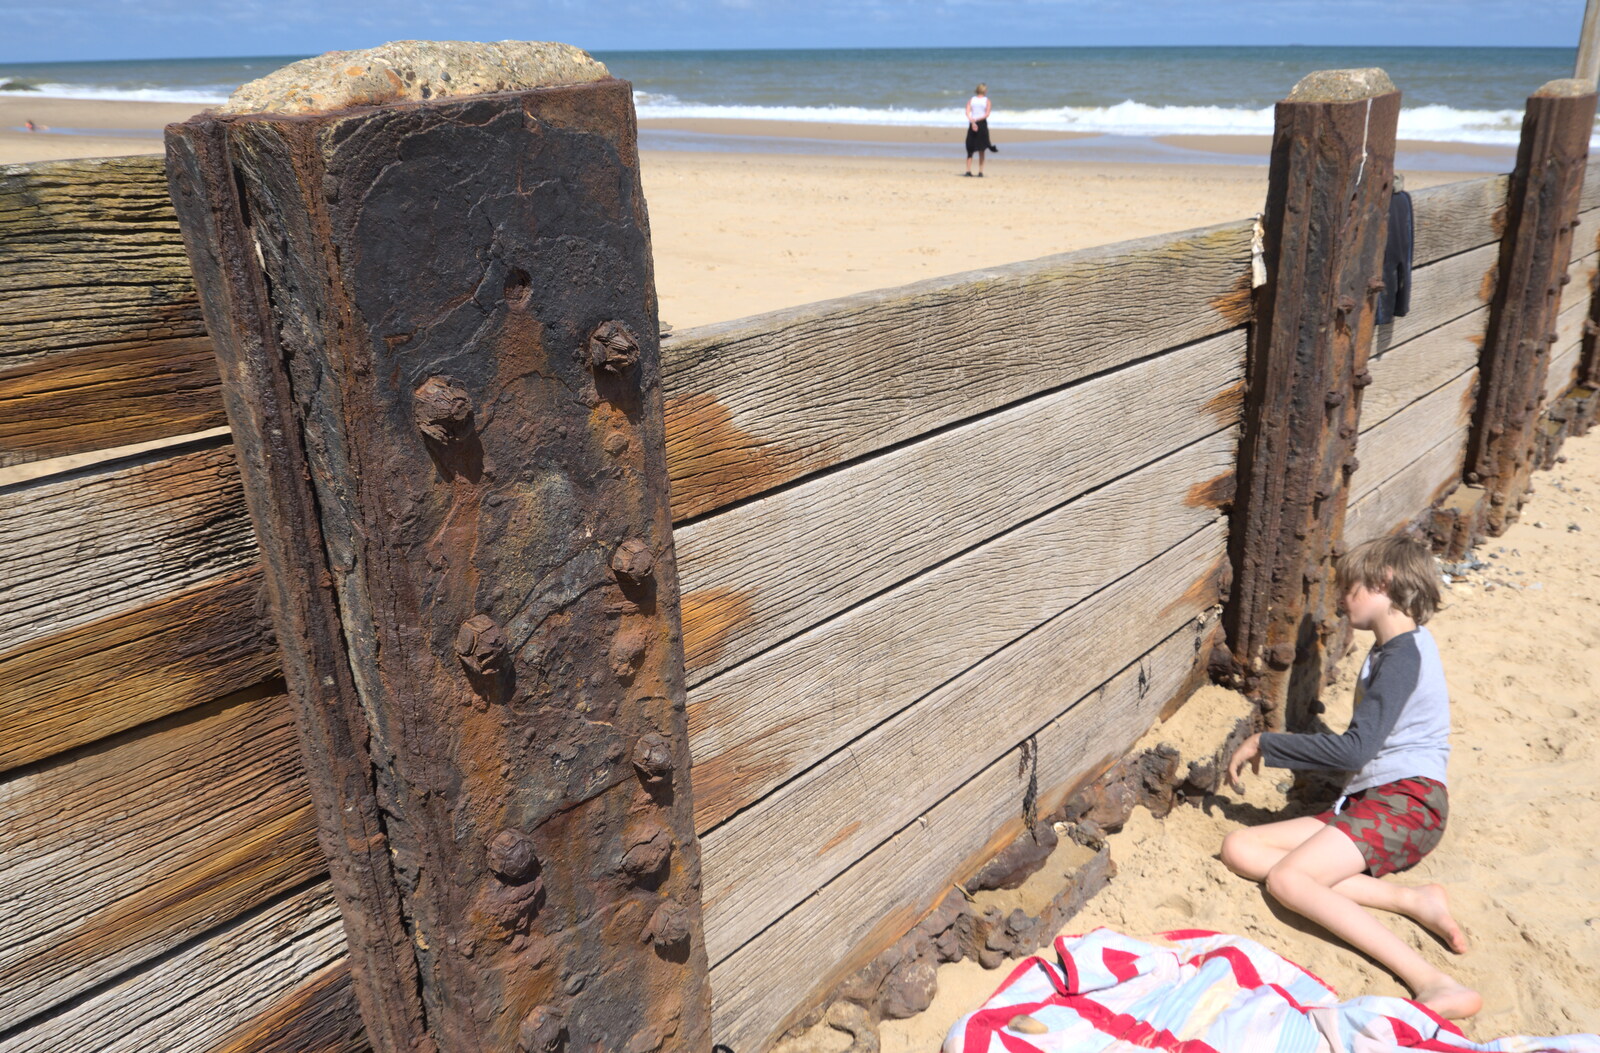 Harry plays amongst the rusted groynes from Camping in the Dunes, Waxham Sands, Norfolk - 9th July 2022